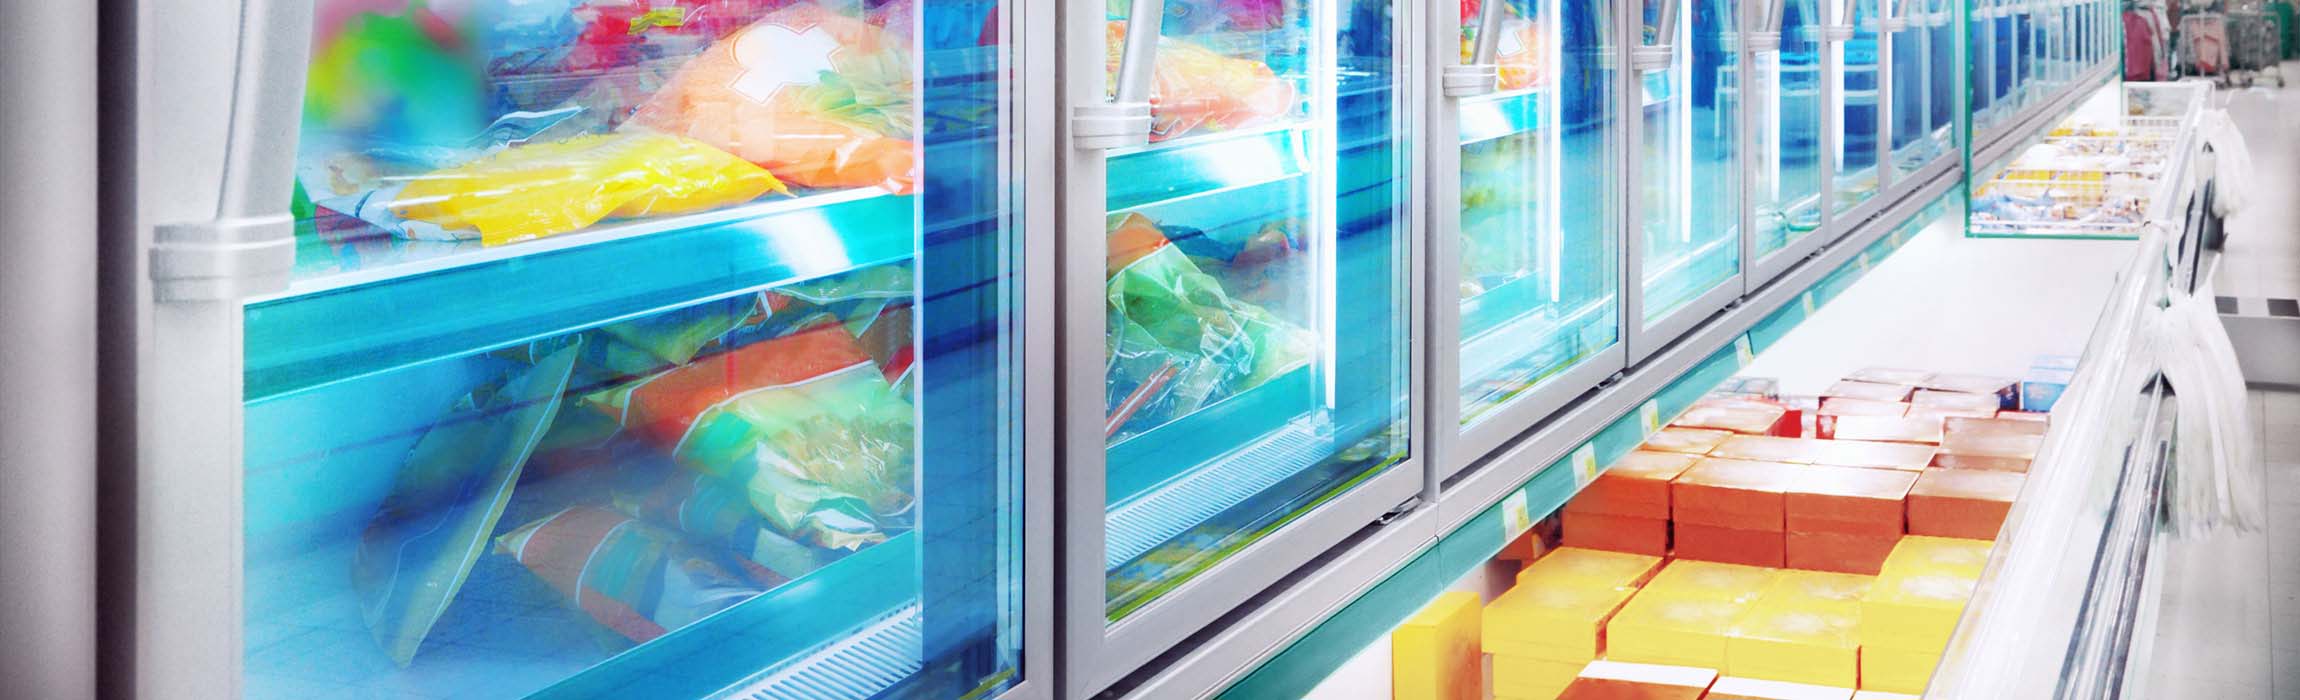 Corona pandemic increased enquiries to TGW for the automation of cold storage.